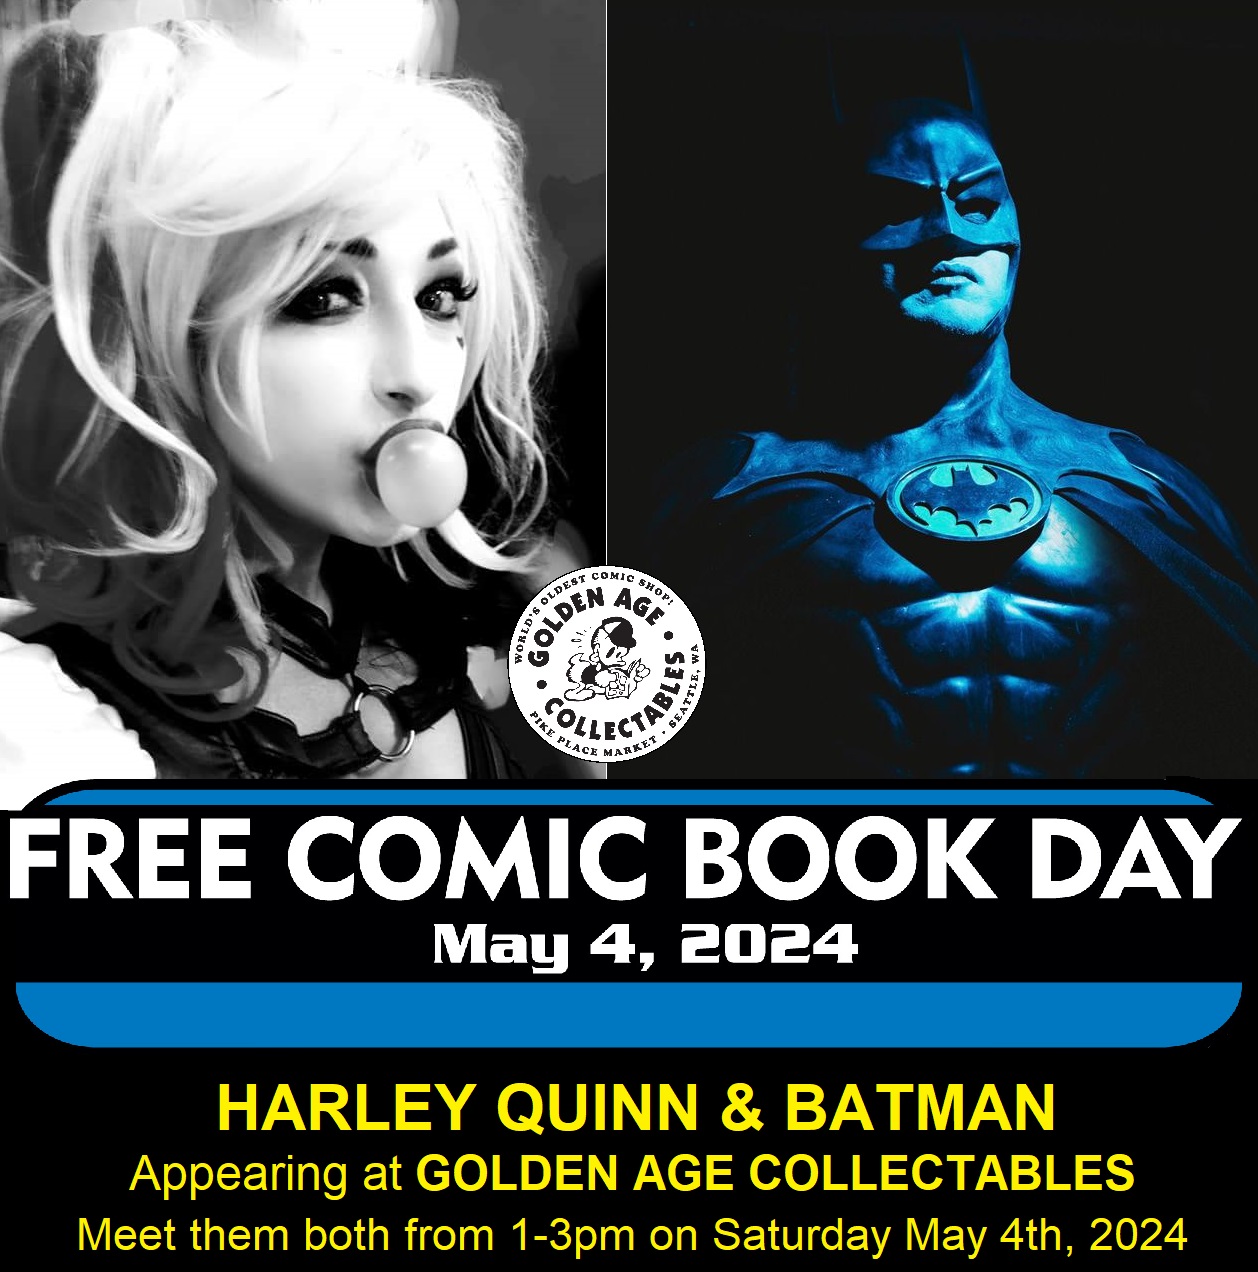 Free Comic Book Day at Golden Age Collectables, May 4th 2024